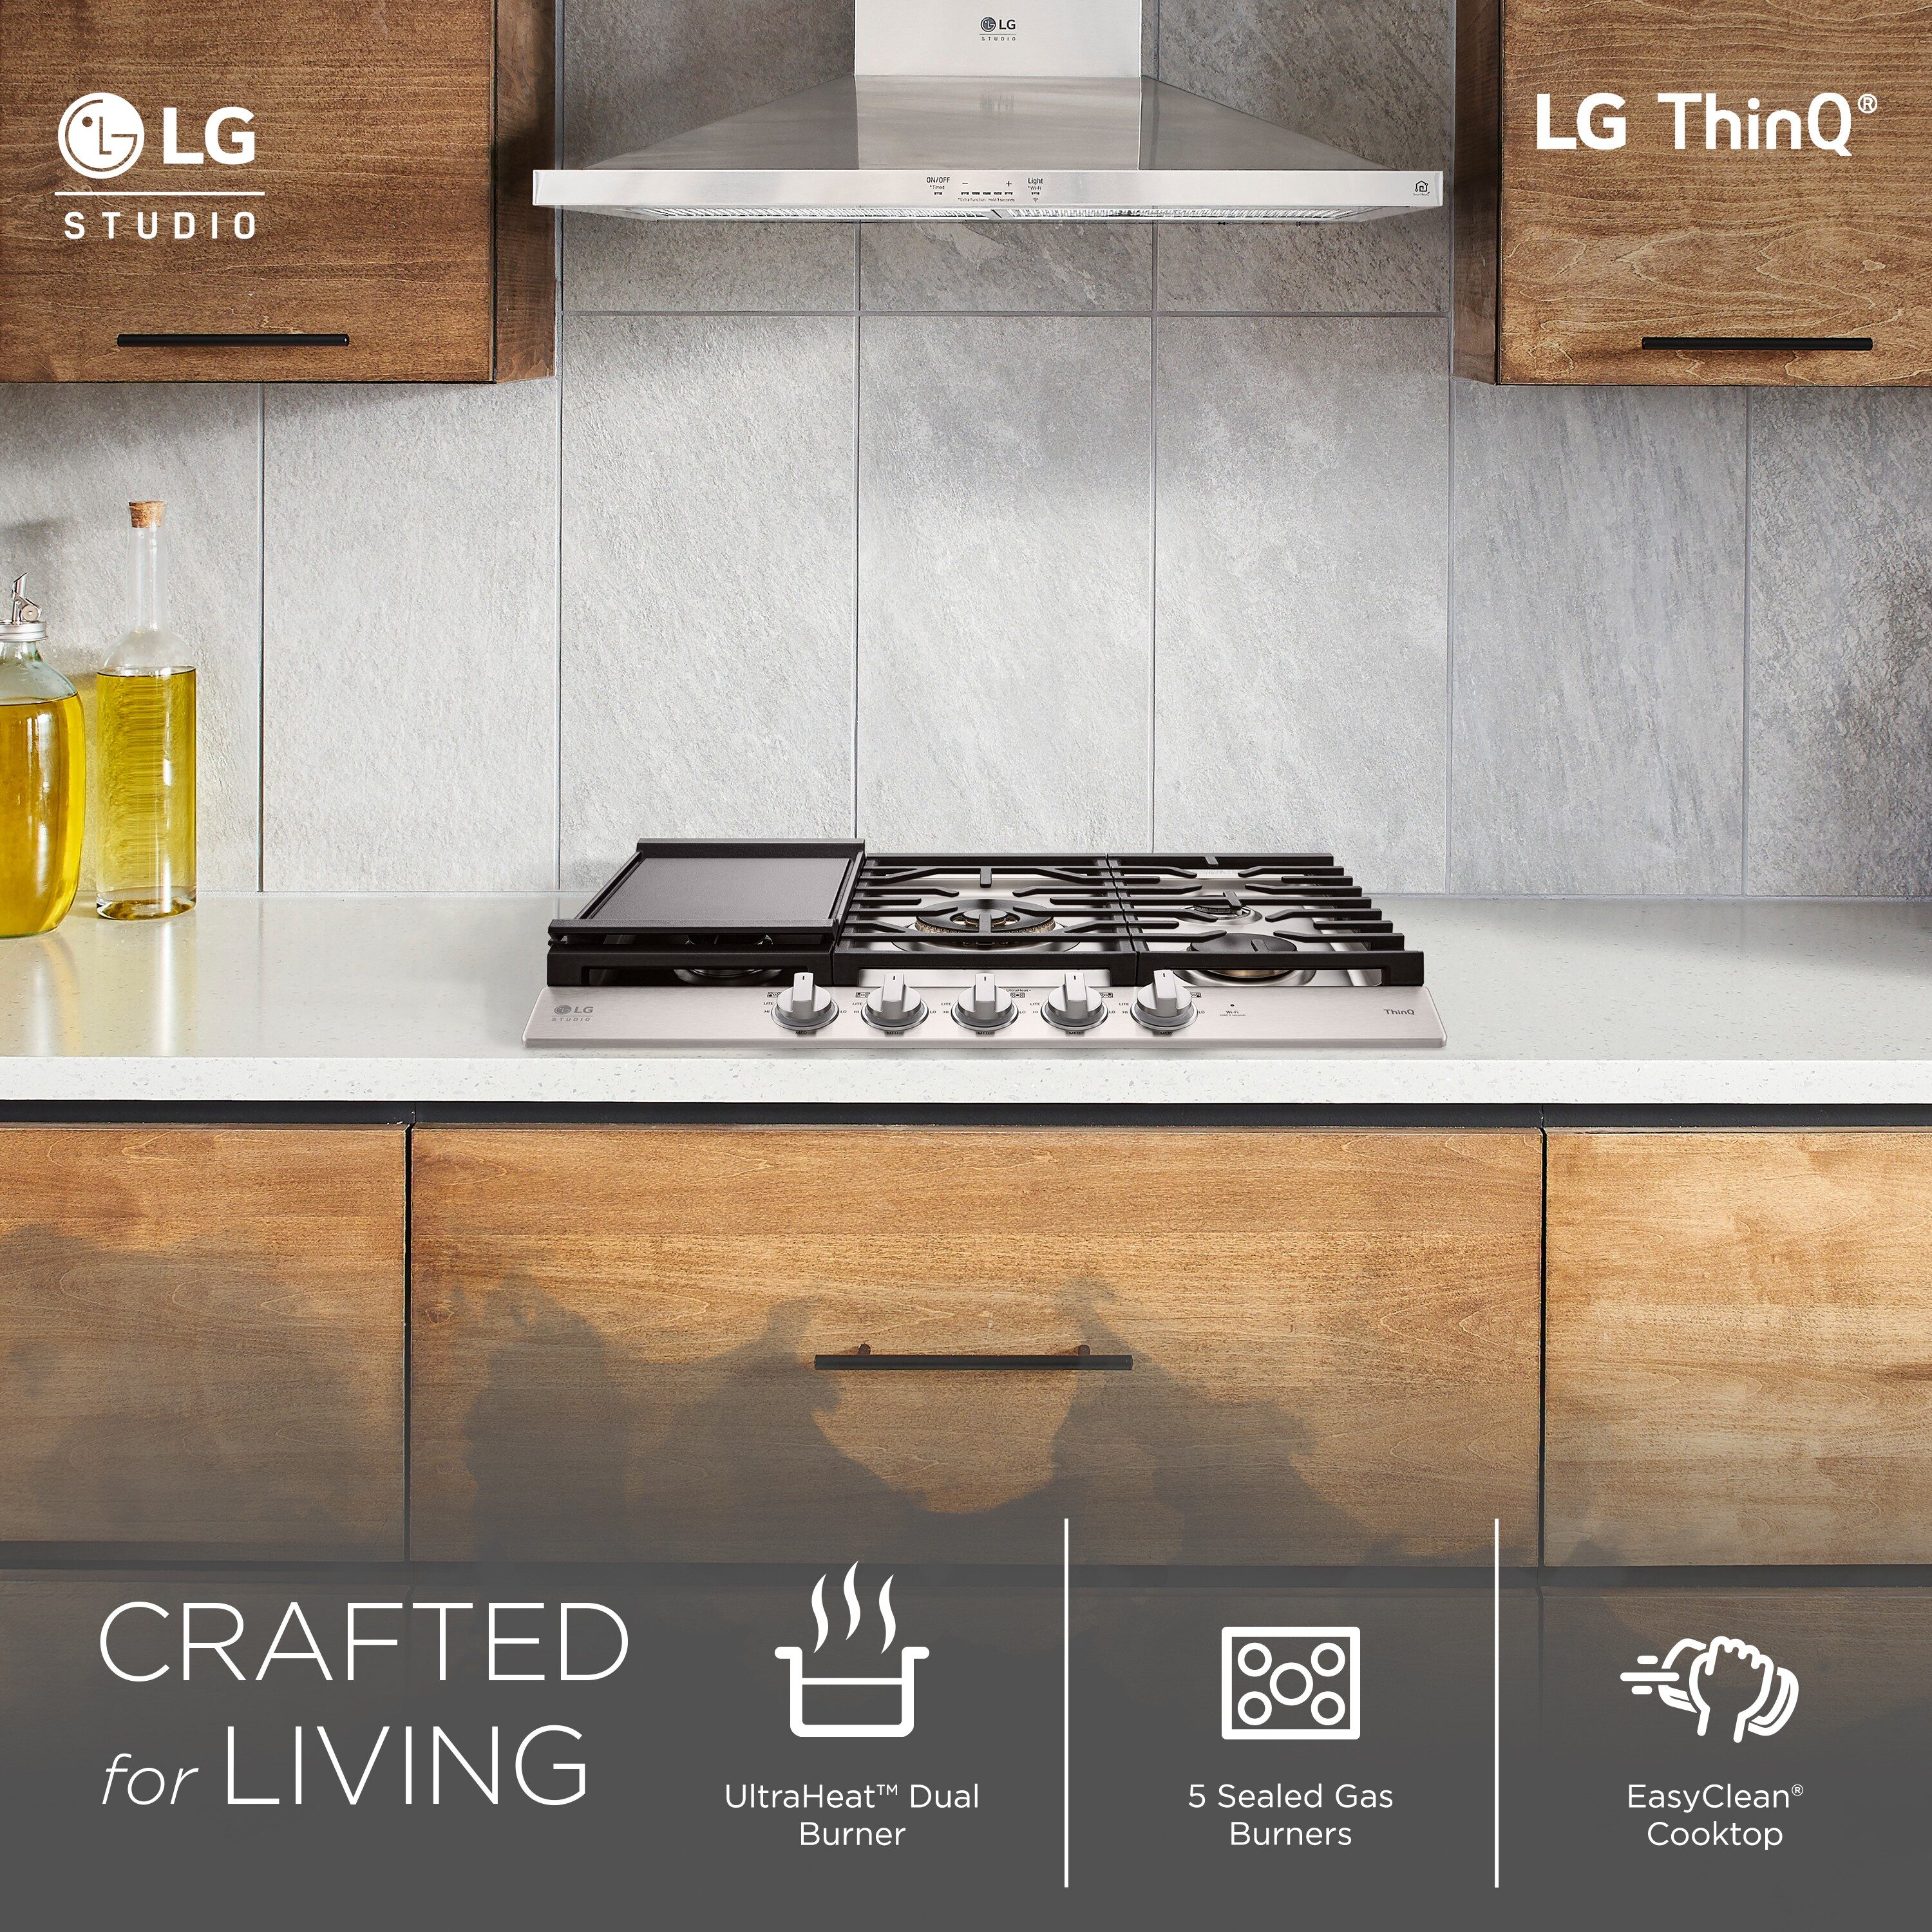 lg 30 inch cooktop